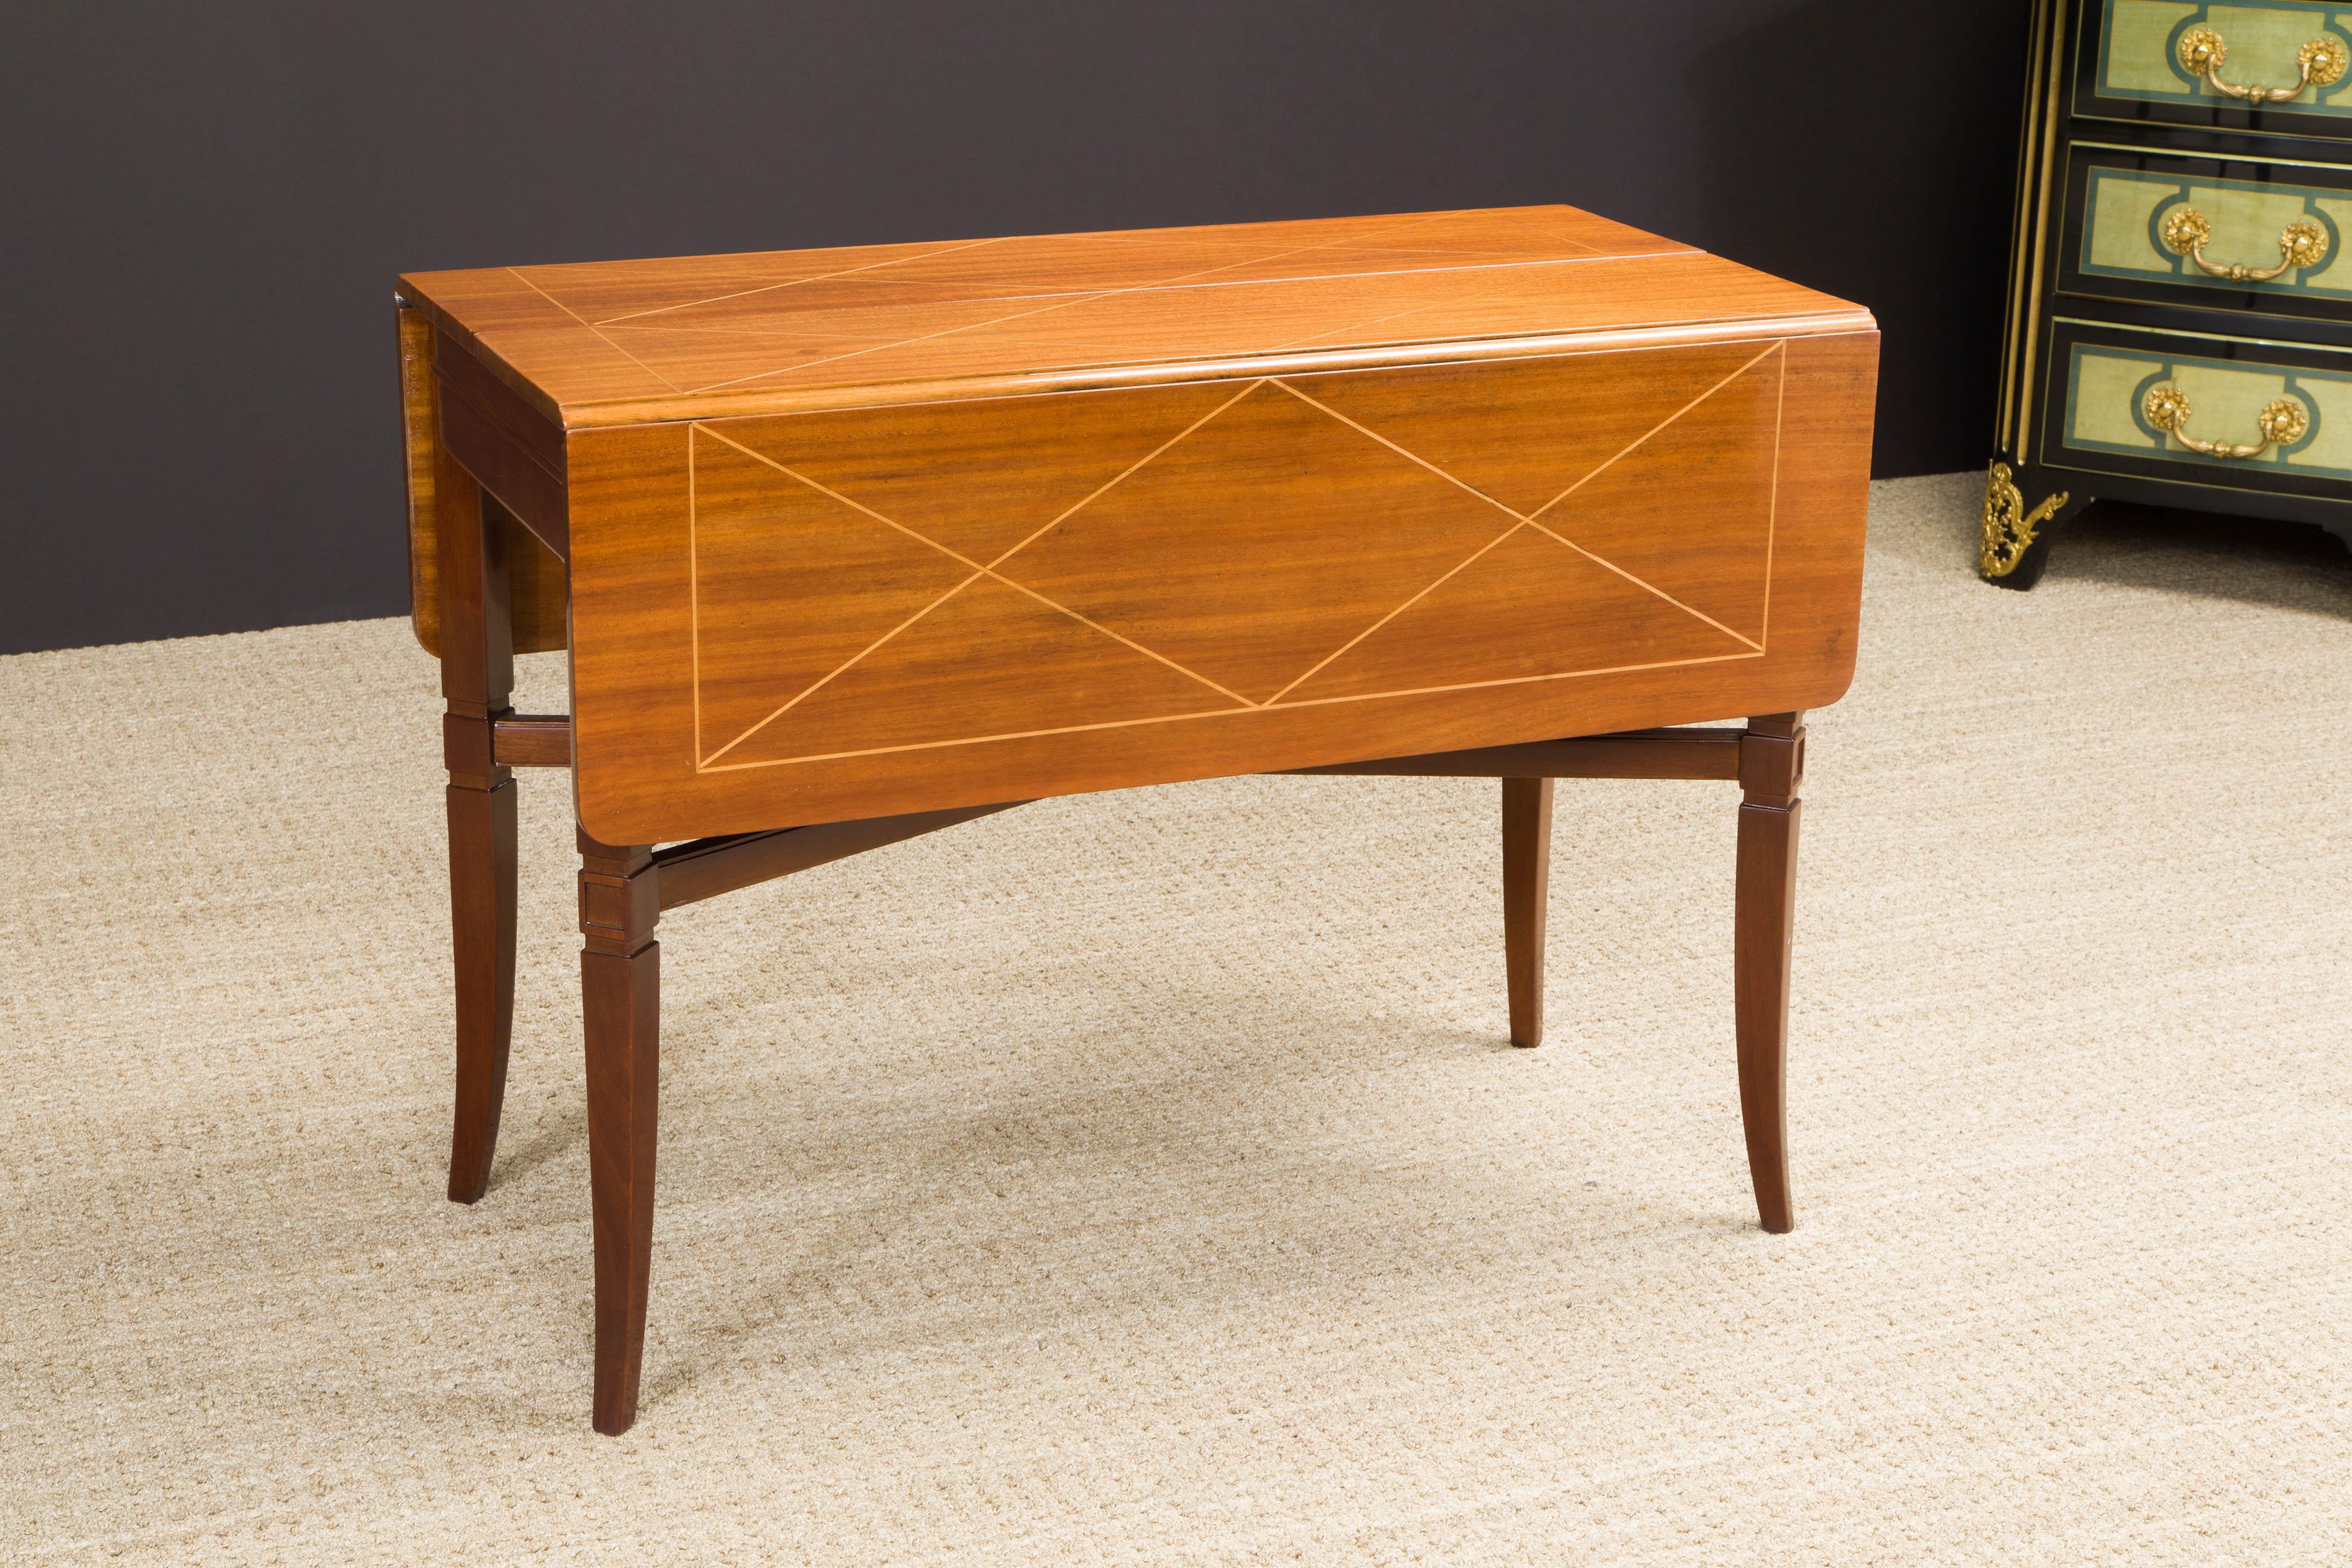 Fruitwood Tommi Parzinger Mahogany Convertible Desk, Dining & Console Table, 1951, Signed 